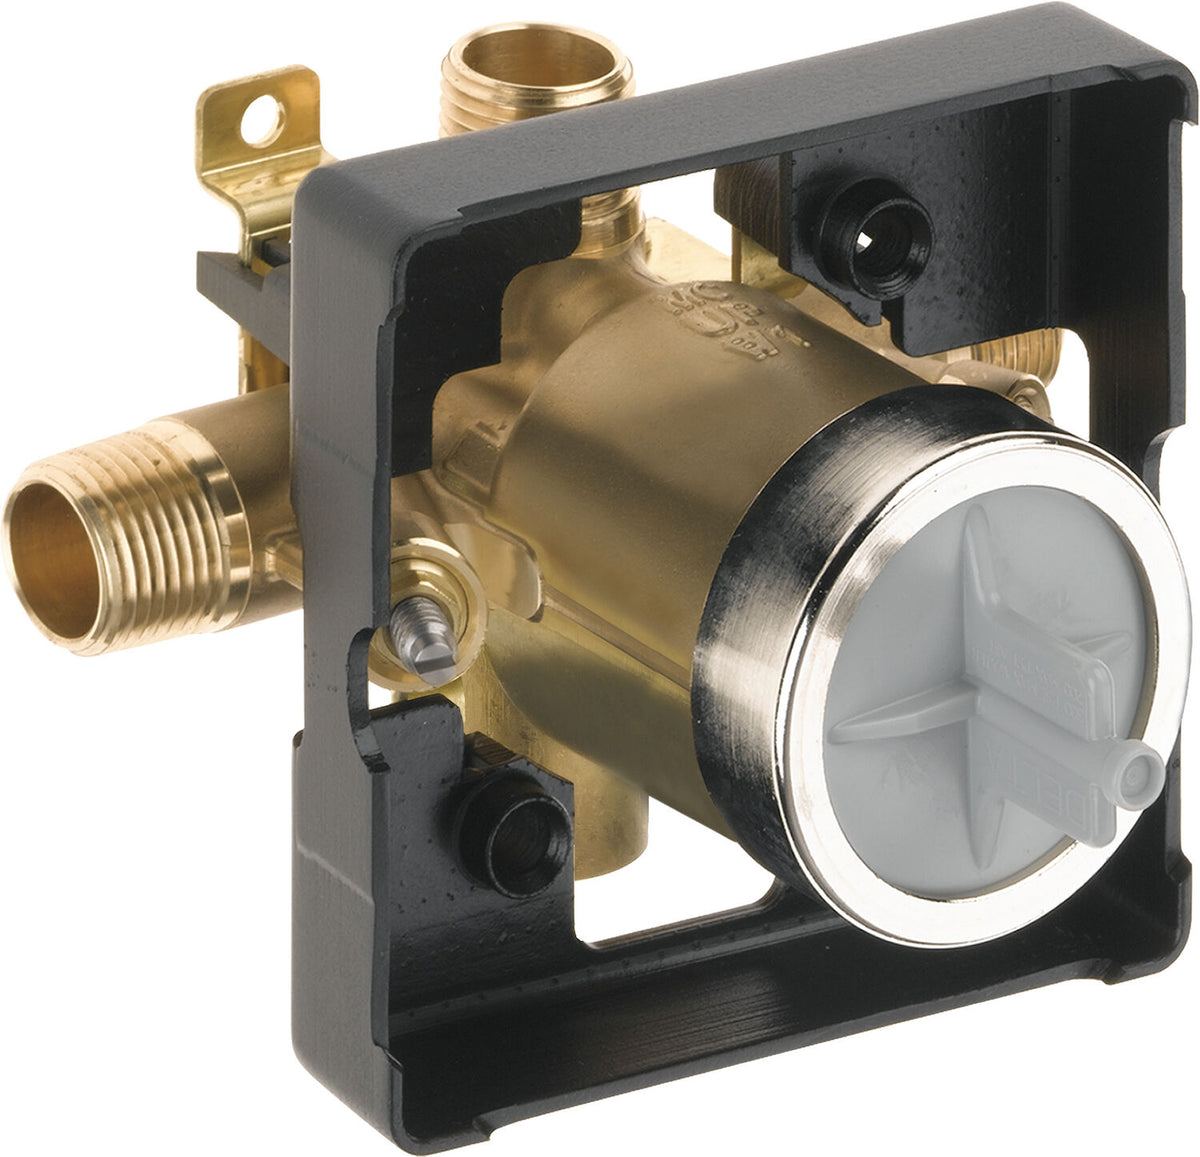 MULTICHOICE® UNIVERSAL HIGH FLOW SHOWER ROUGH WITH STOPS